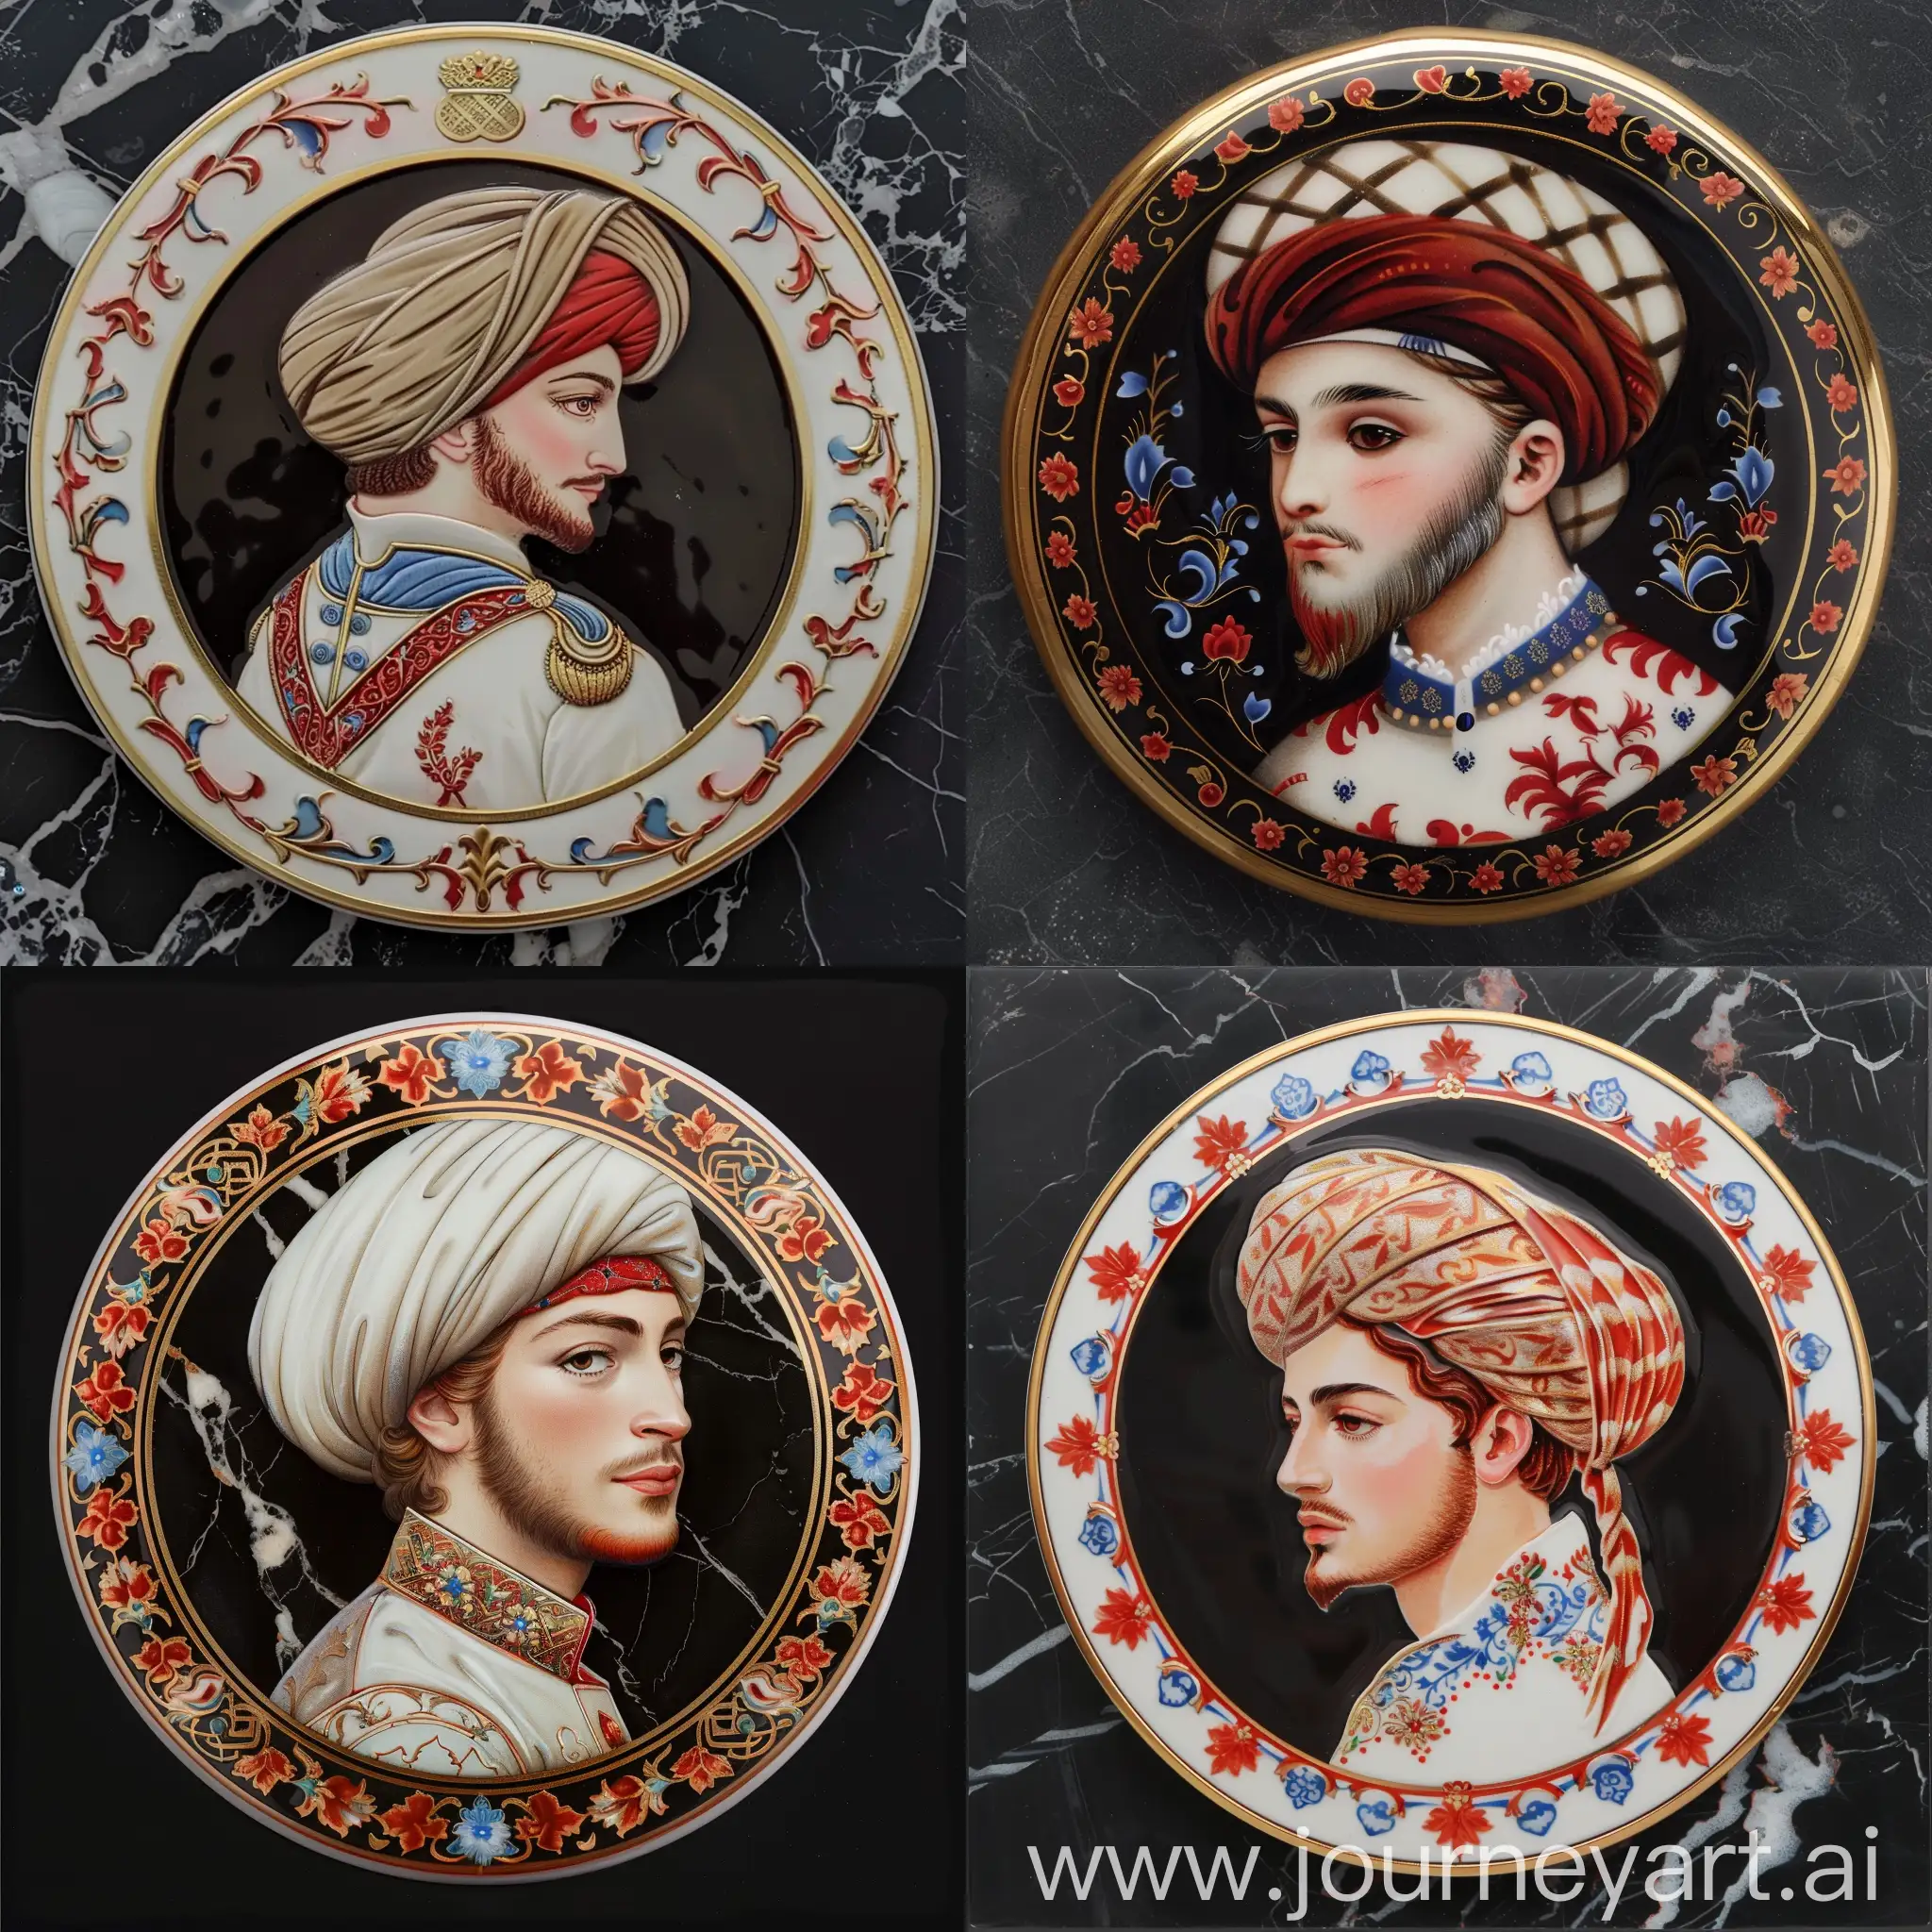 Exquisite-British-Prince-Porcelain-Seal-with-Ottoman-Turban-and-Persian-Attire